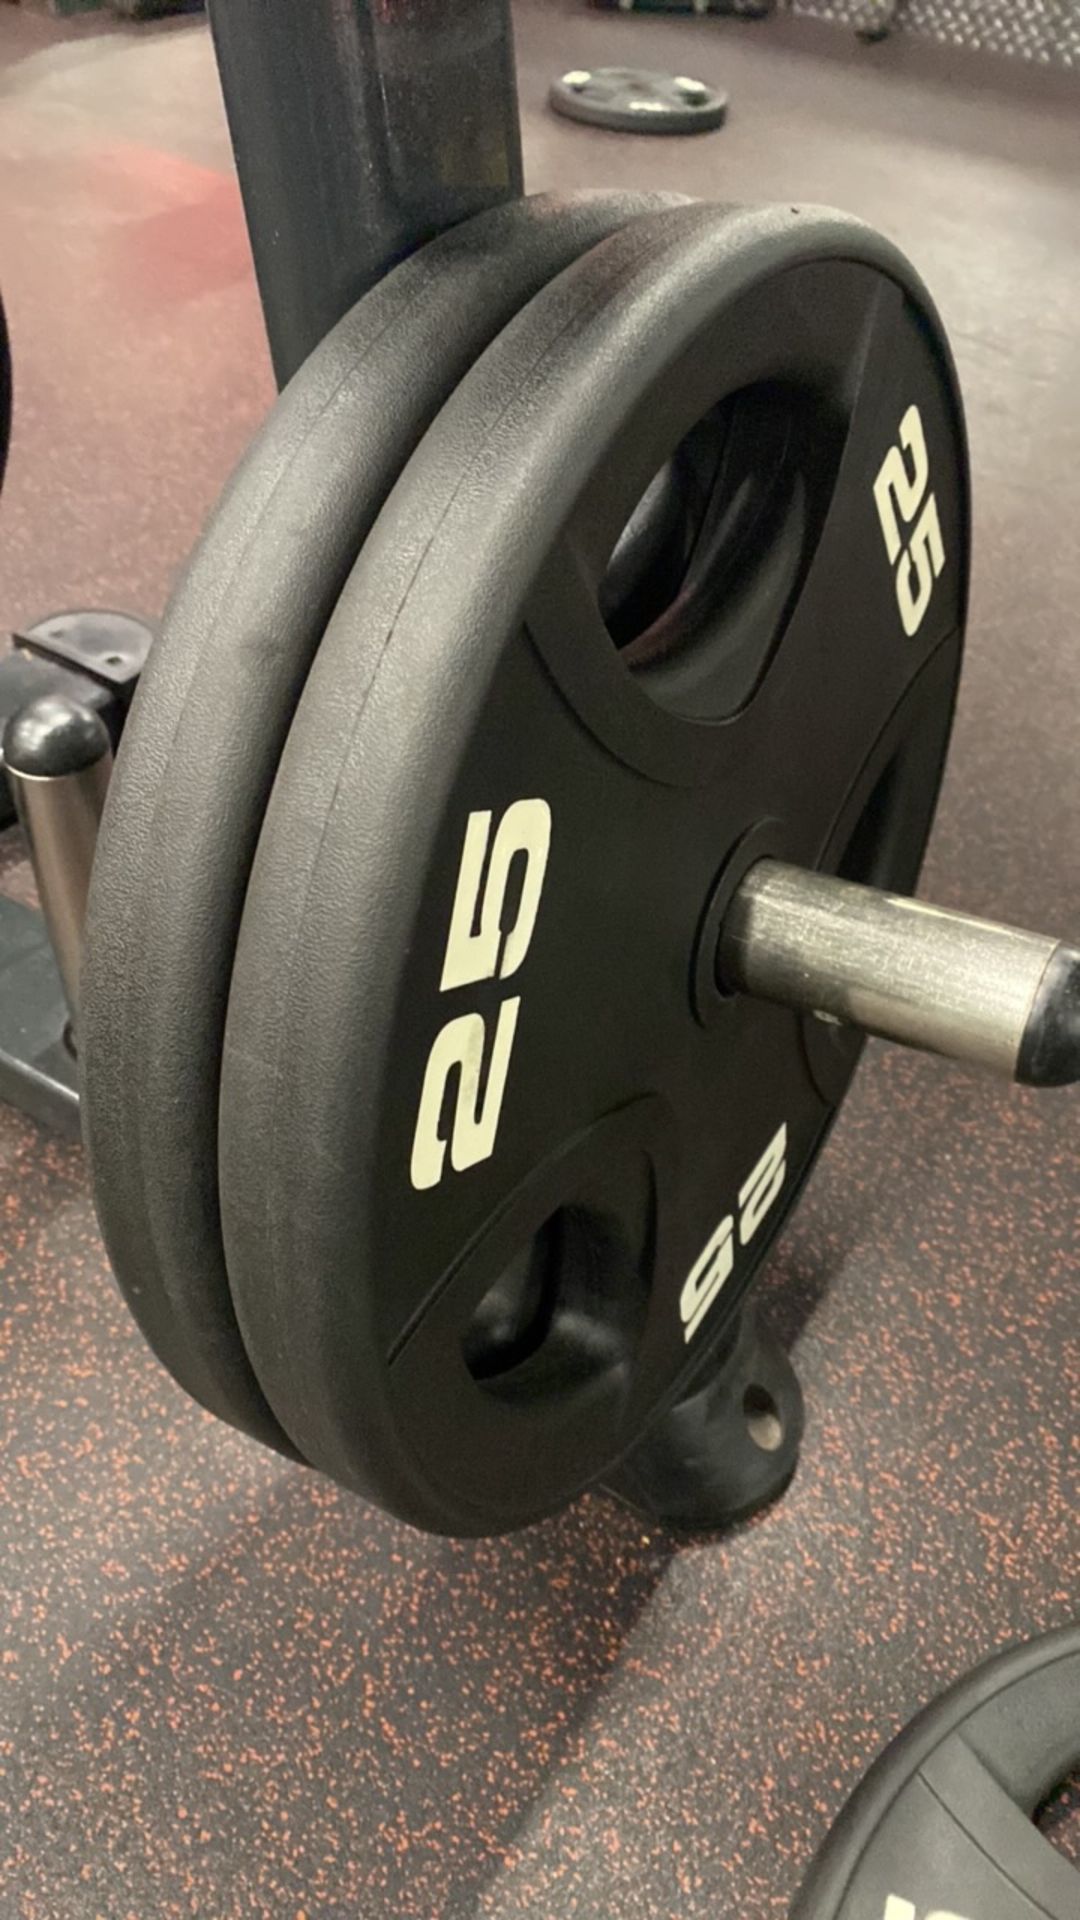 25Kg Bumper Weight Plate X2 - Image 3 of 3